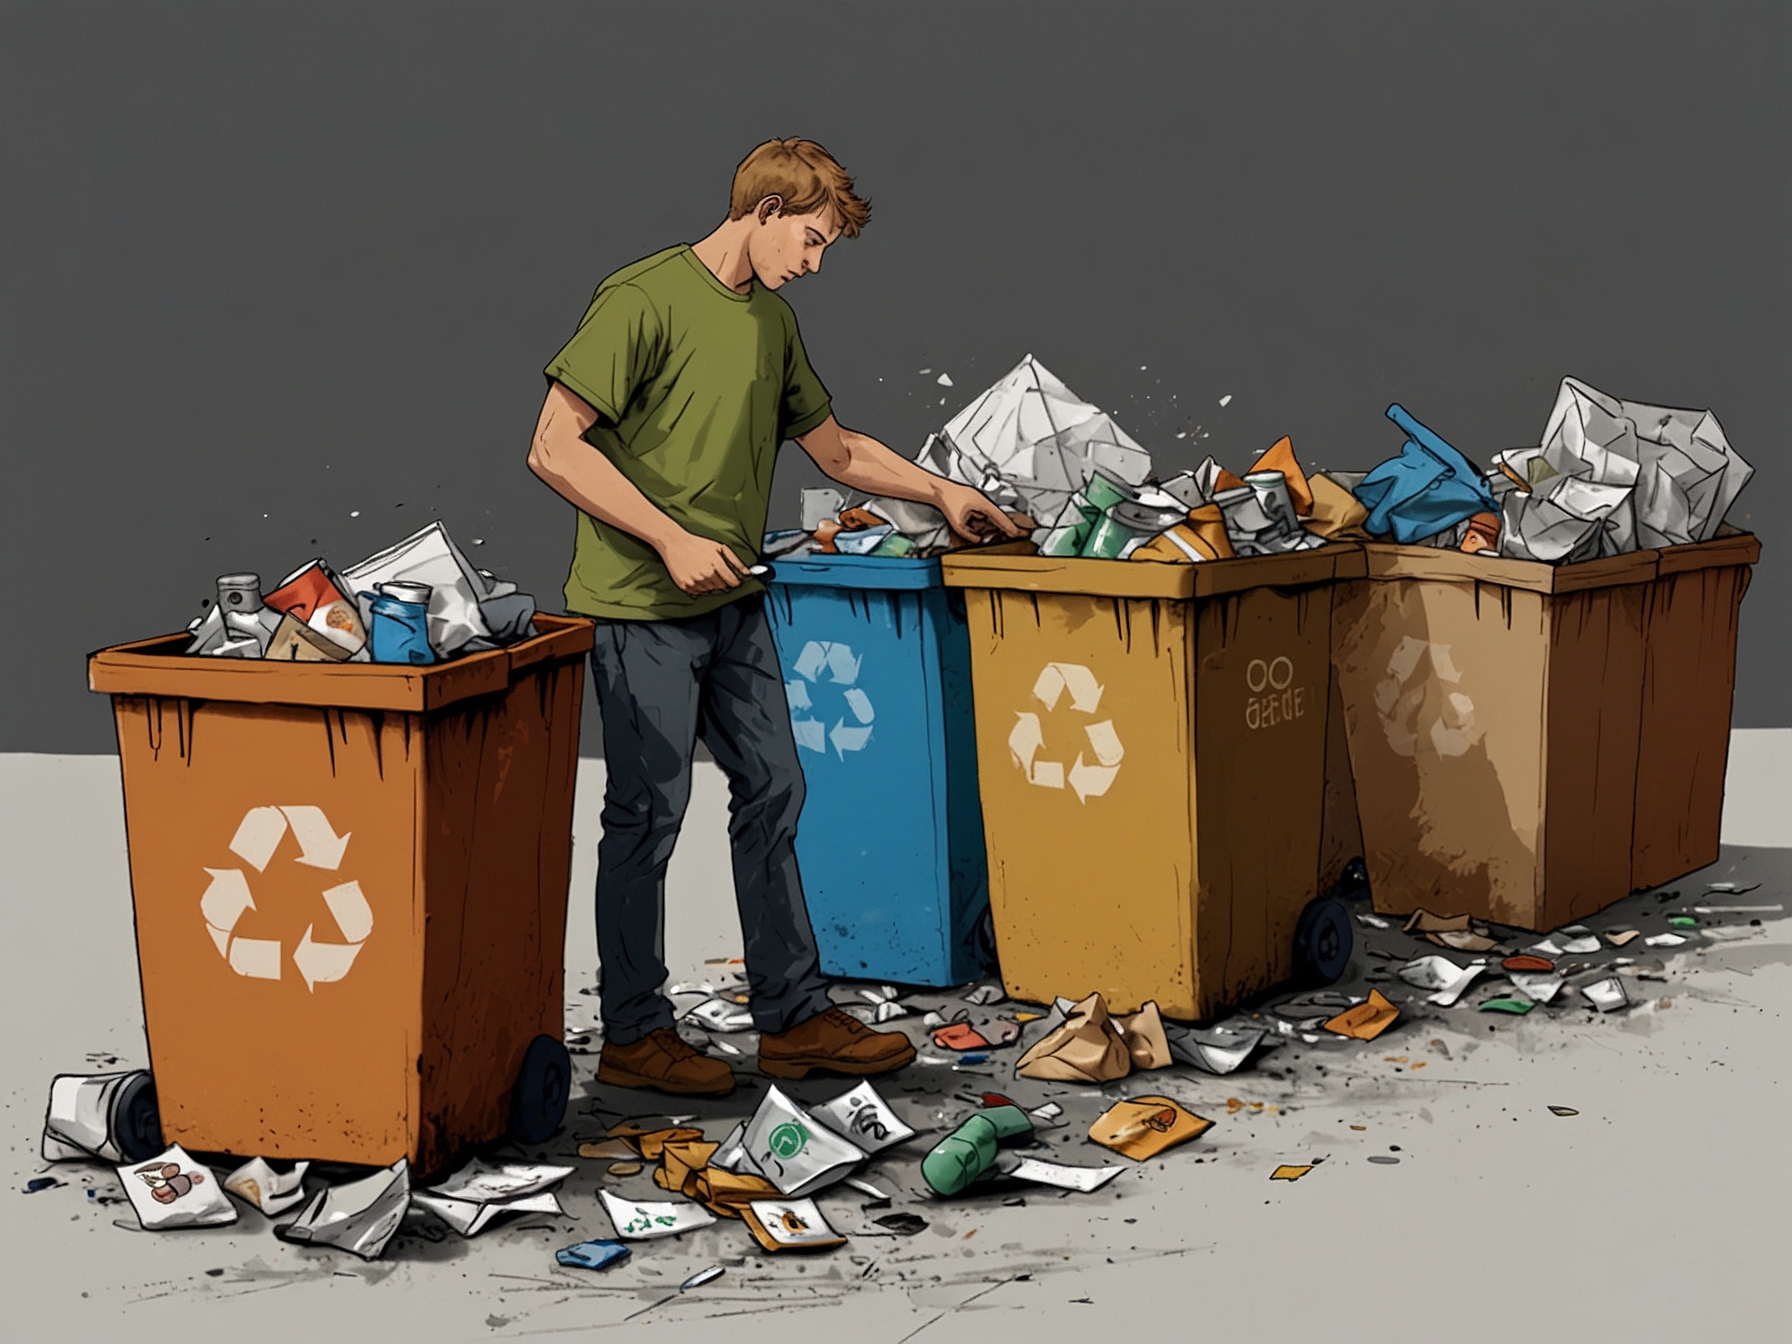 An illustration showing a person sorting recyclable materials properly, with bins for various categories like plastic, glass, and paper, highlighting proper recycling habits to prevent contamination.